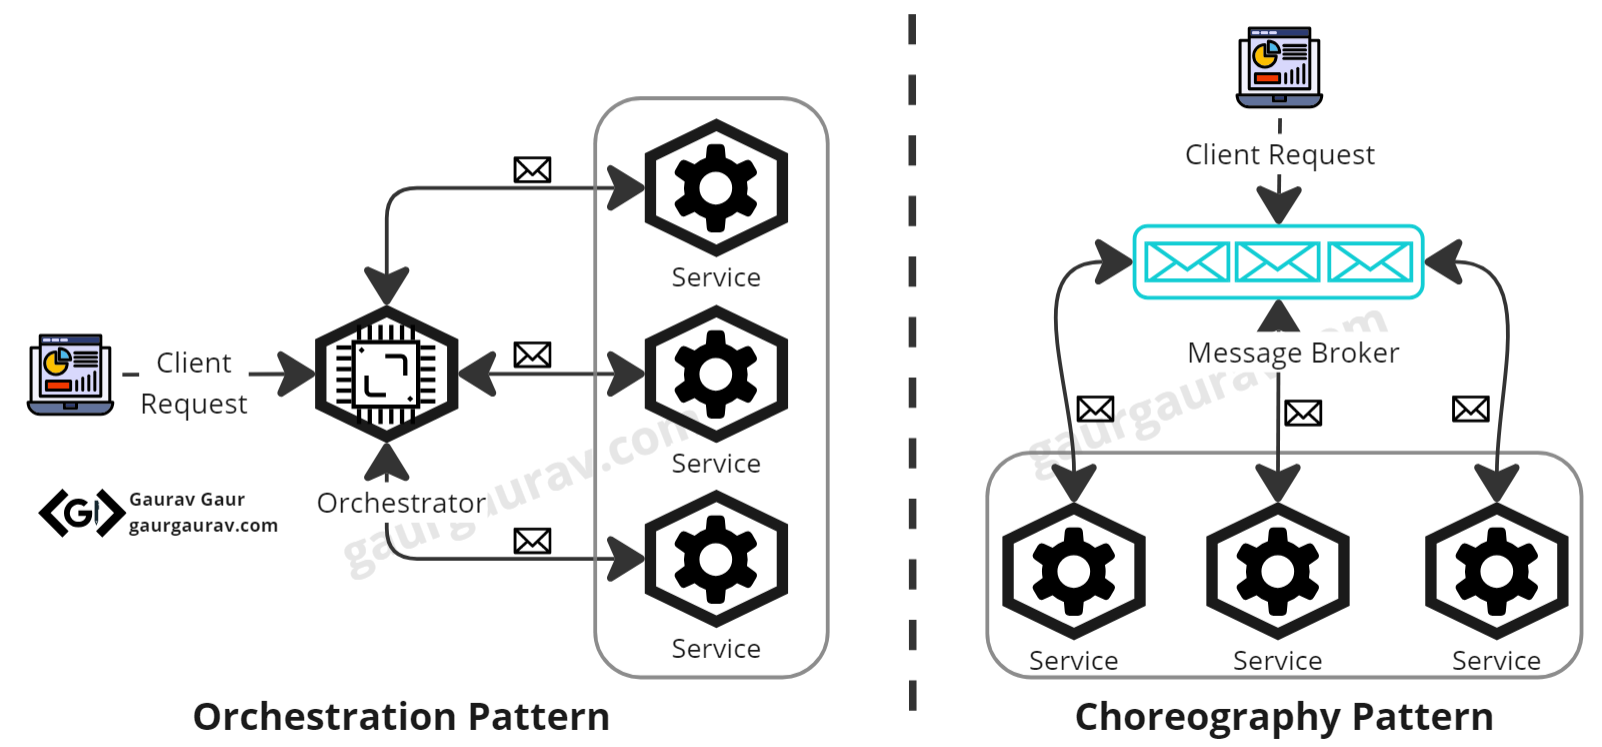 Comparing Orchestration Pattern and Choreography Pattern